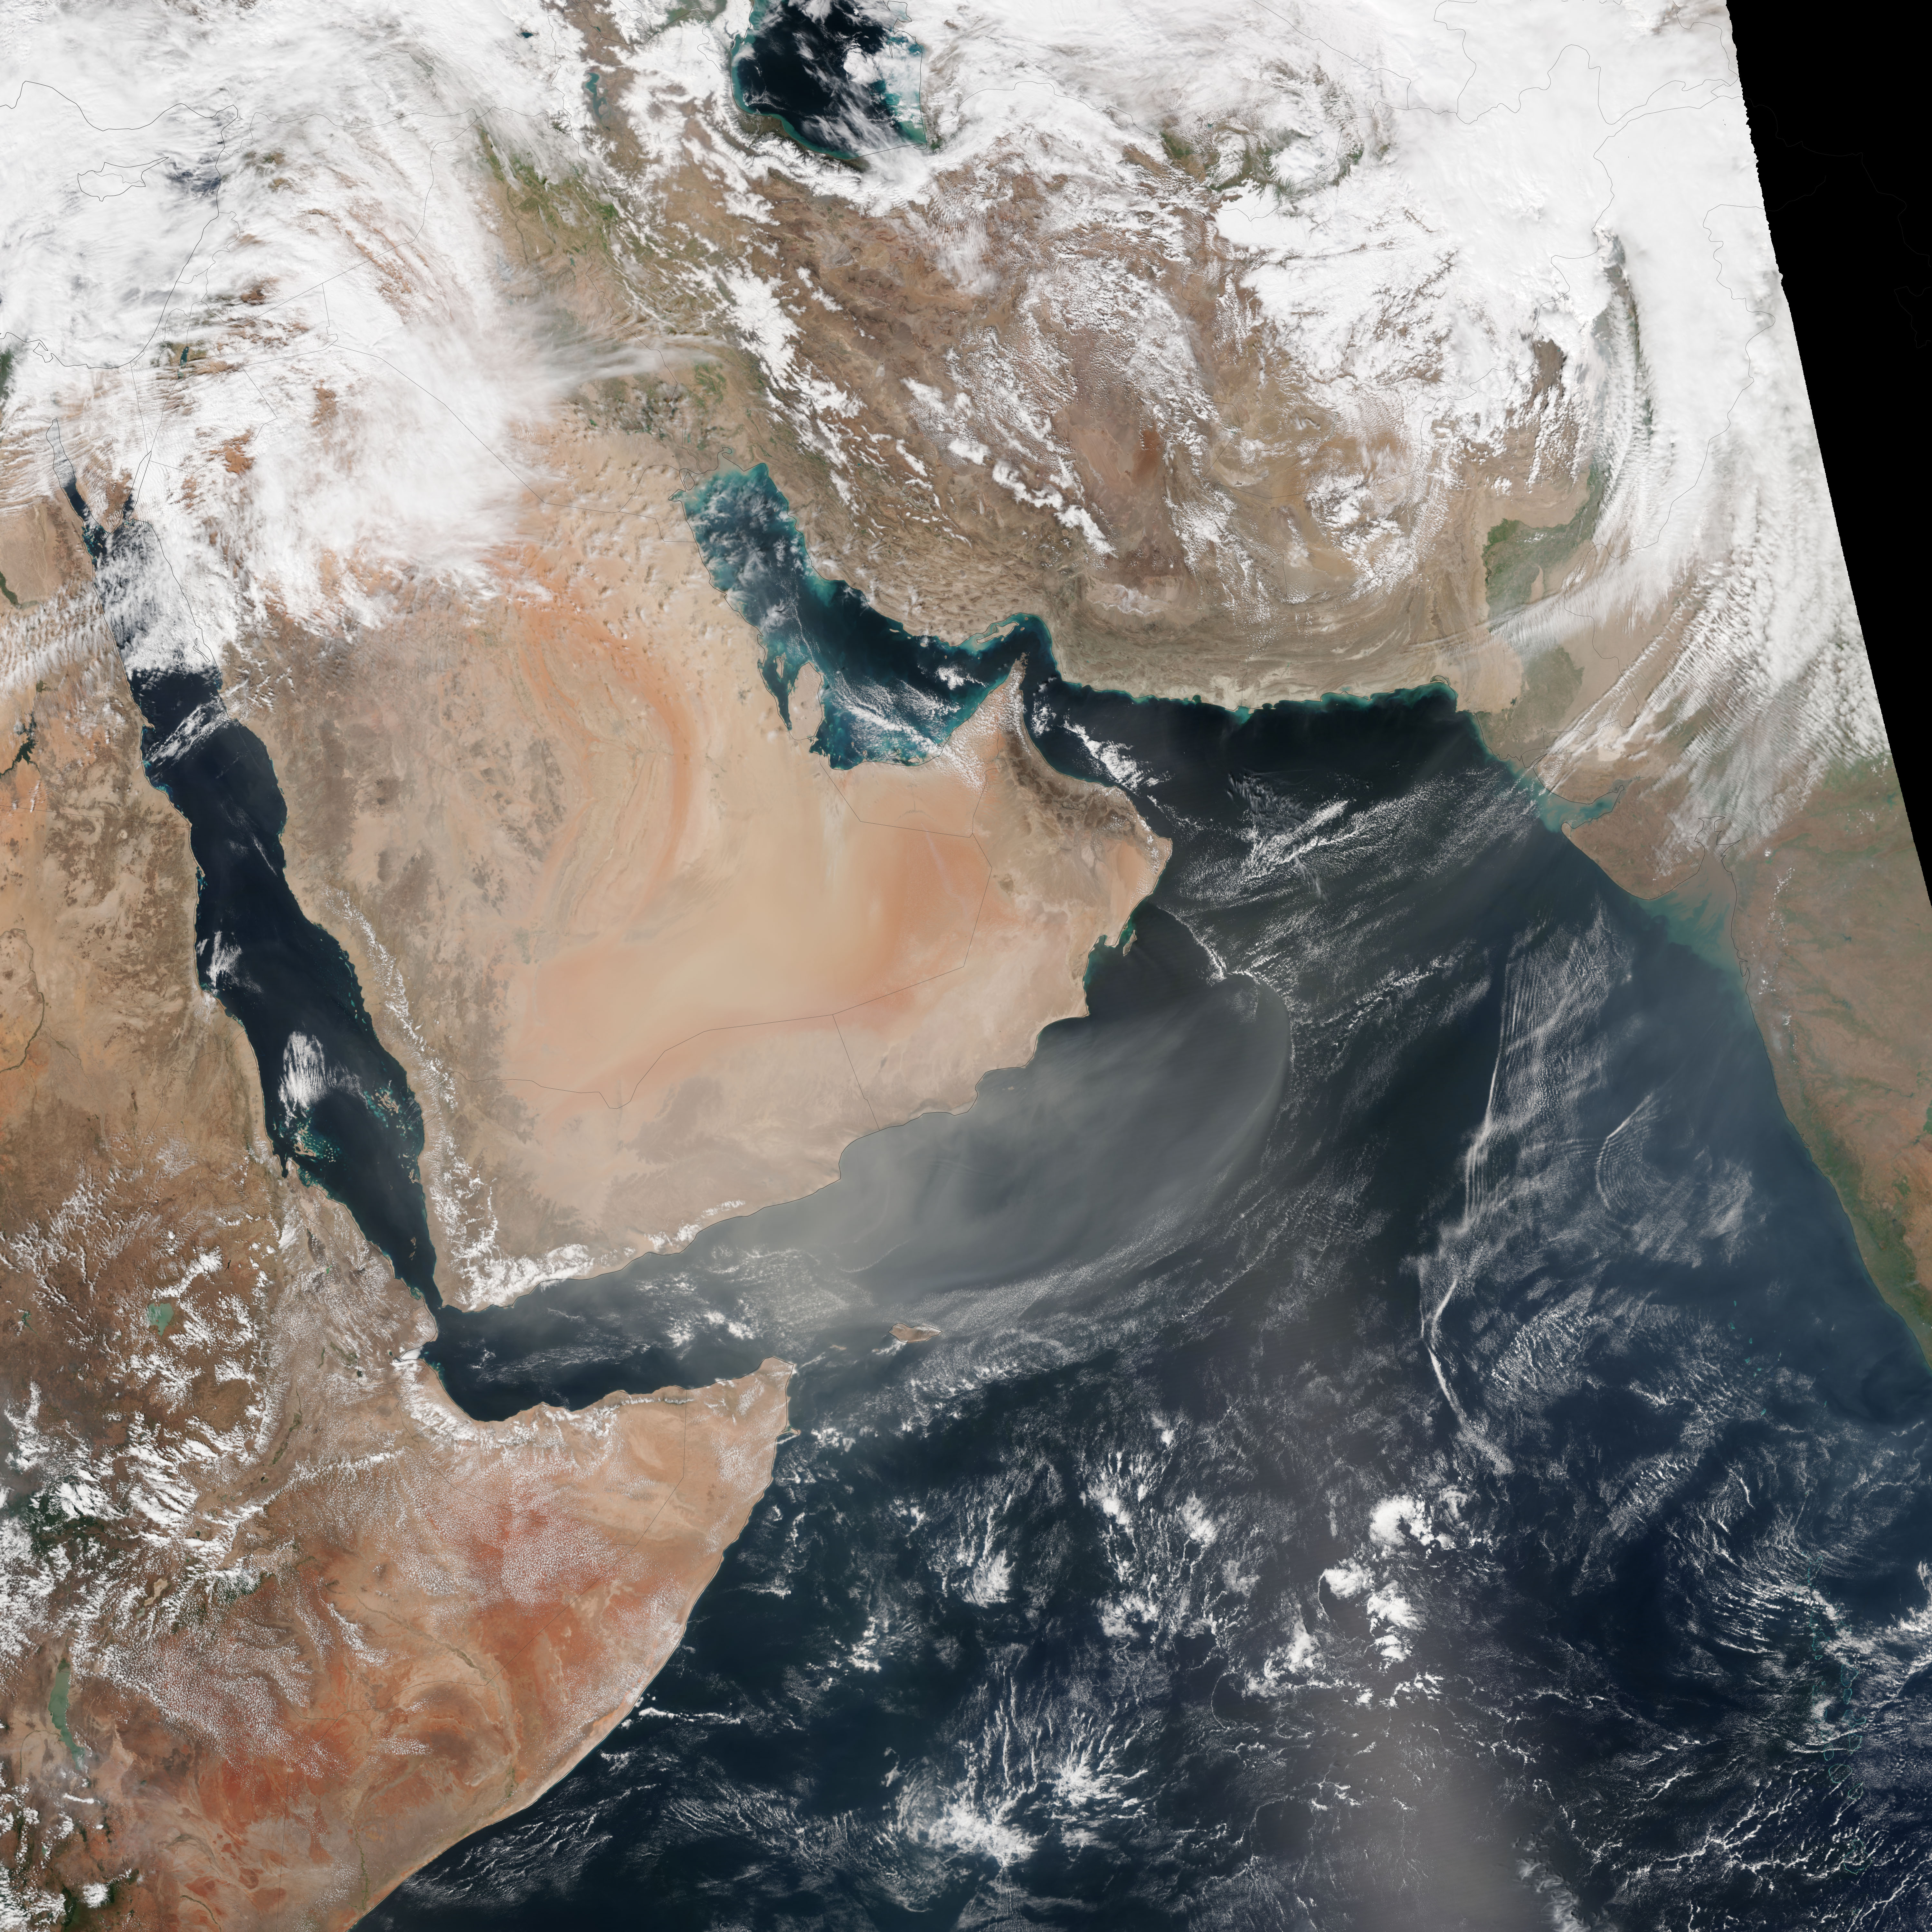 Persistent Dust Storms on the Southern Arabian Peninsula - related image preview